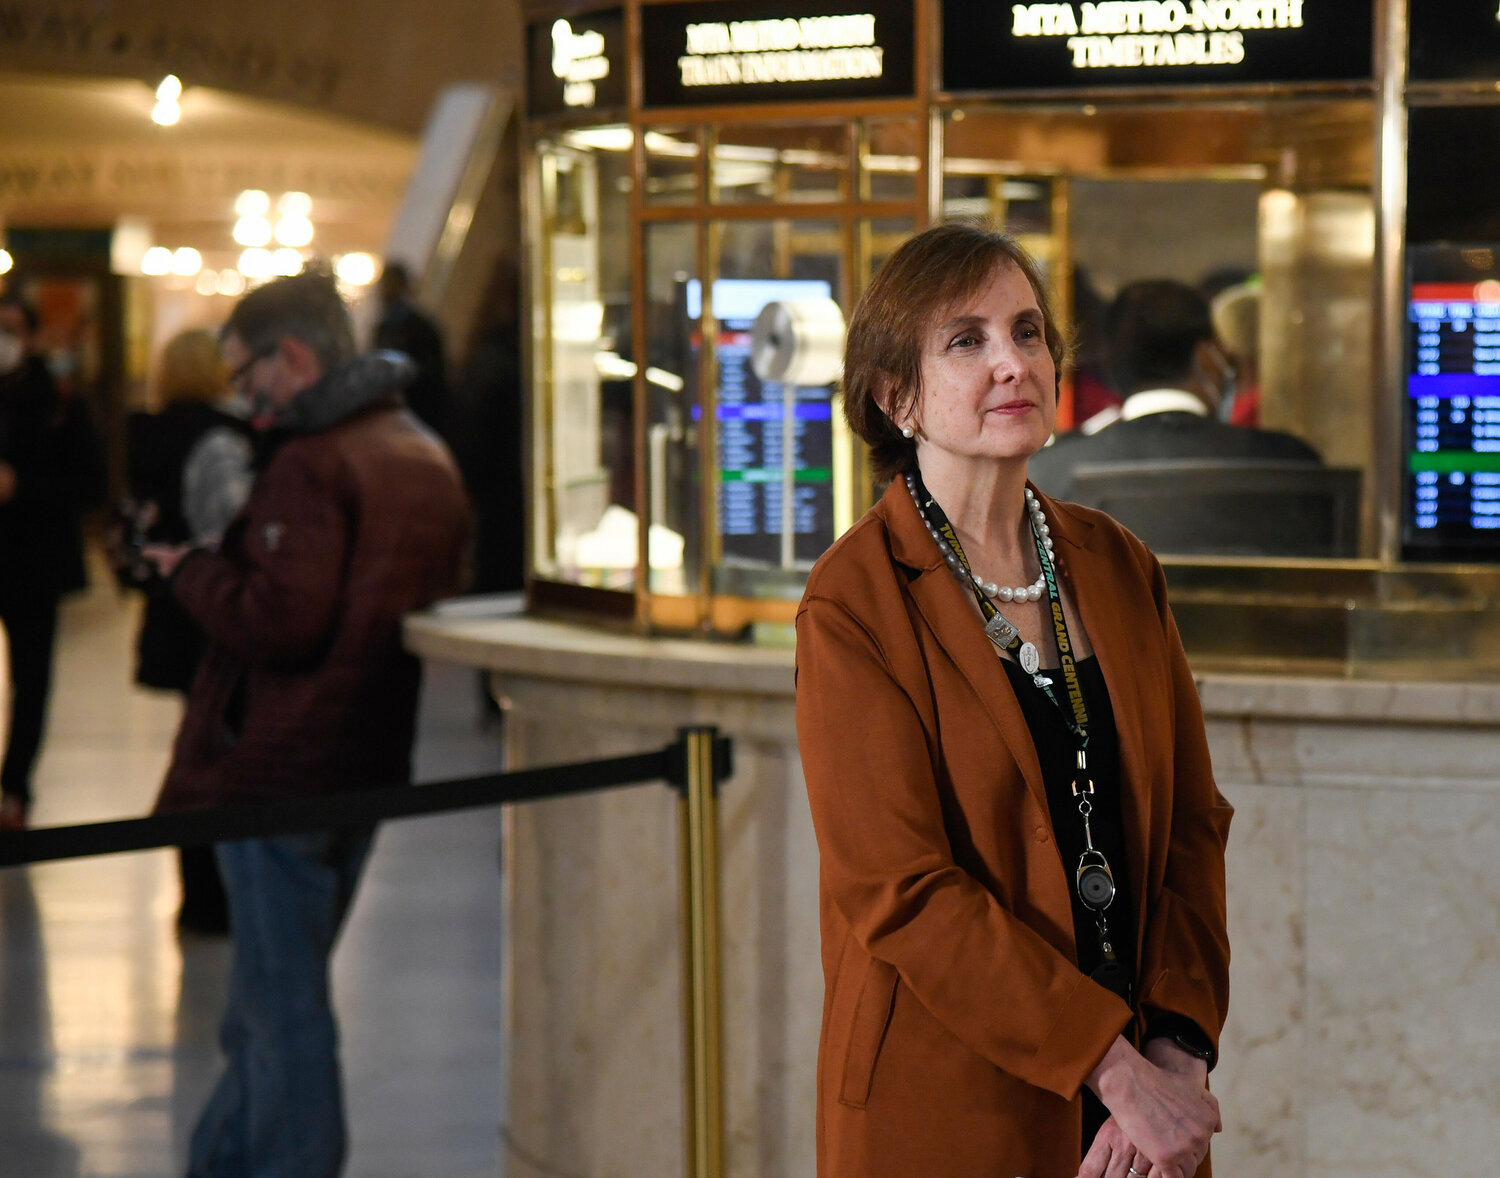 Interim Long Island Rail Road President Catherine Rinaldi, above, announced her resignation from her position following calls from local officials and commuters for full-time presidential leadership.